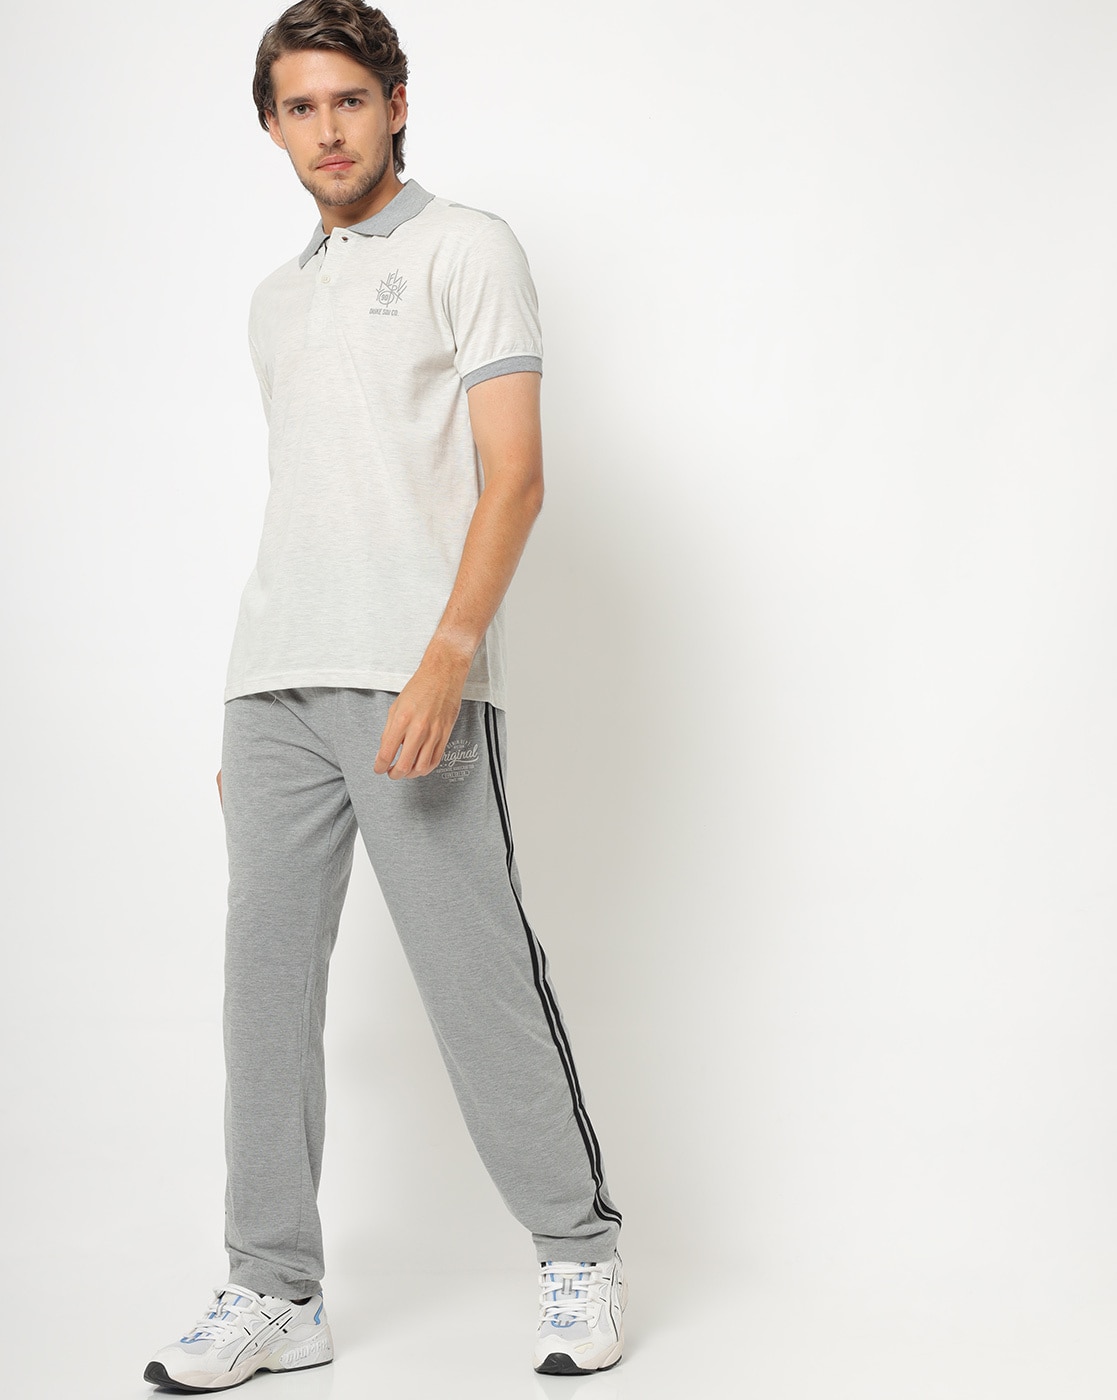 Male Polyester Track Pants